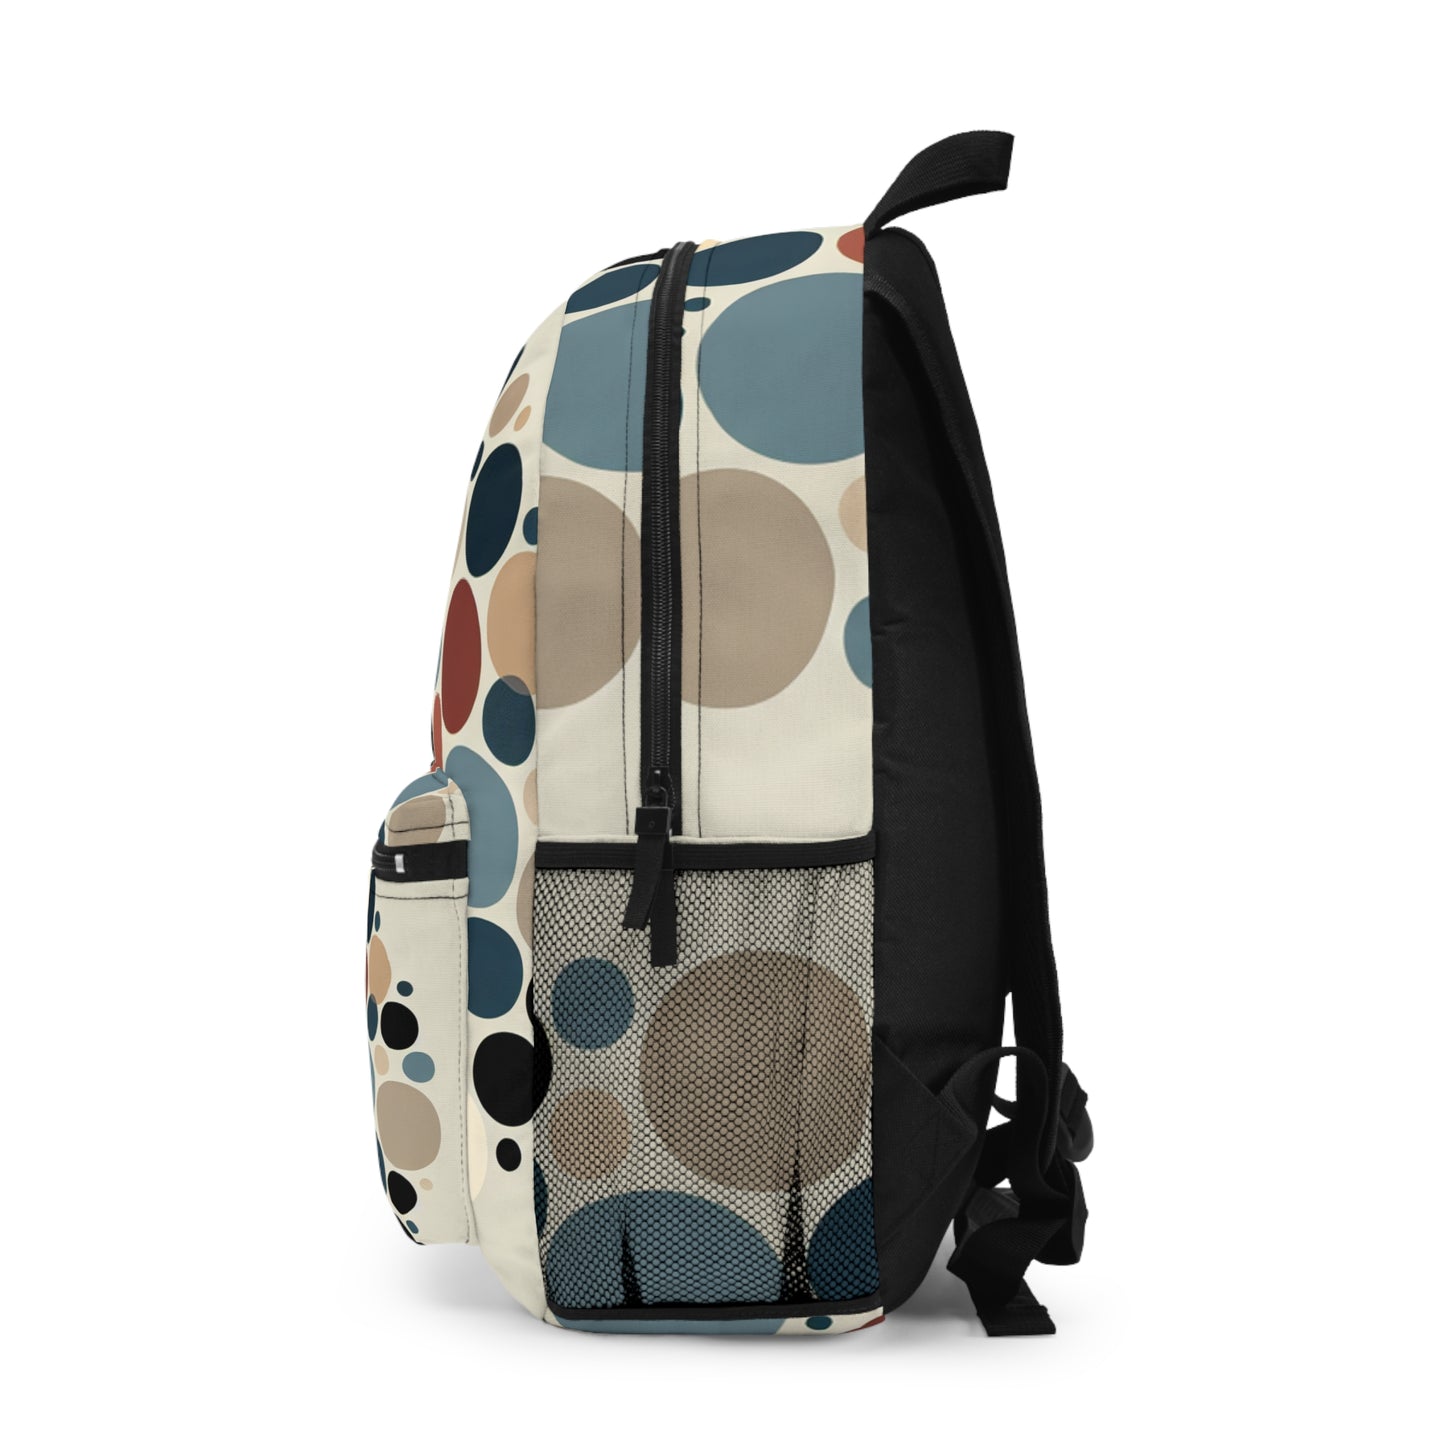 "Interwoven Circles: A Minimalist Approach" - The Alien Backpack Minimalism Style